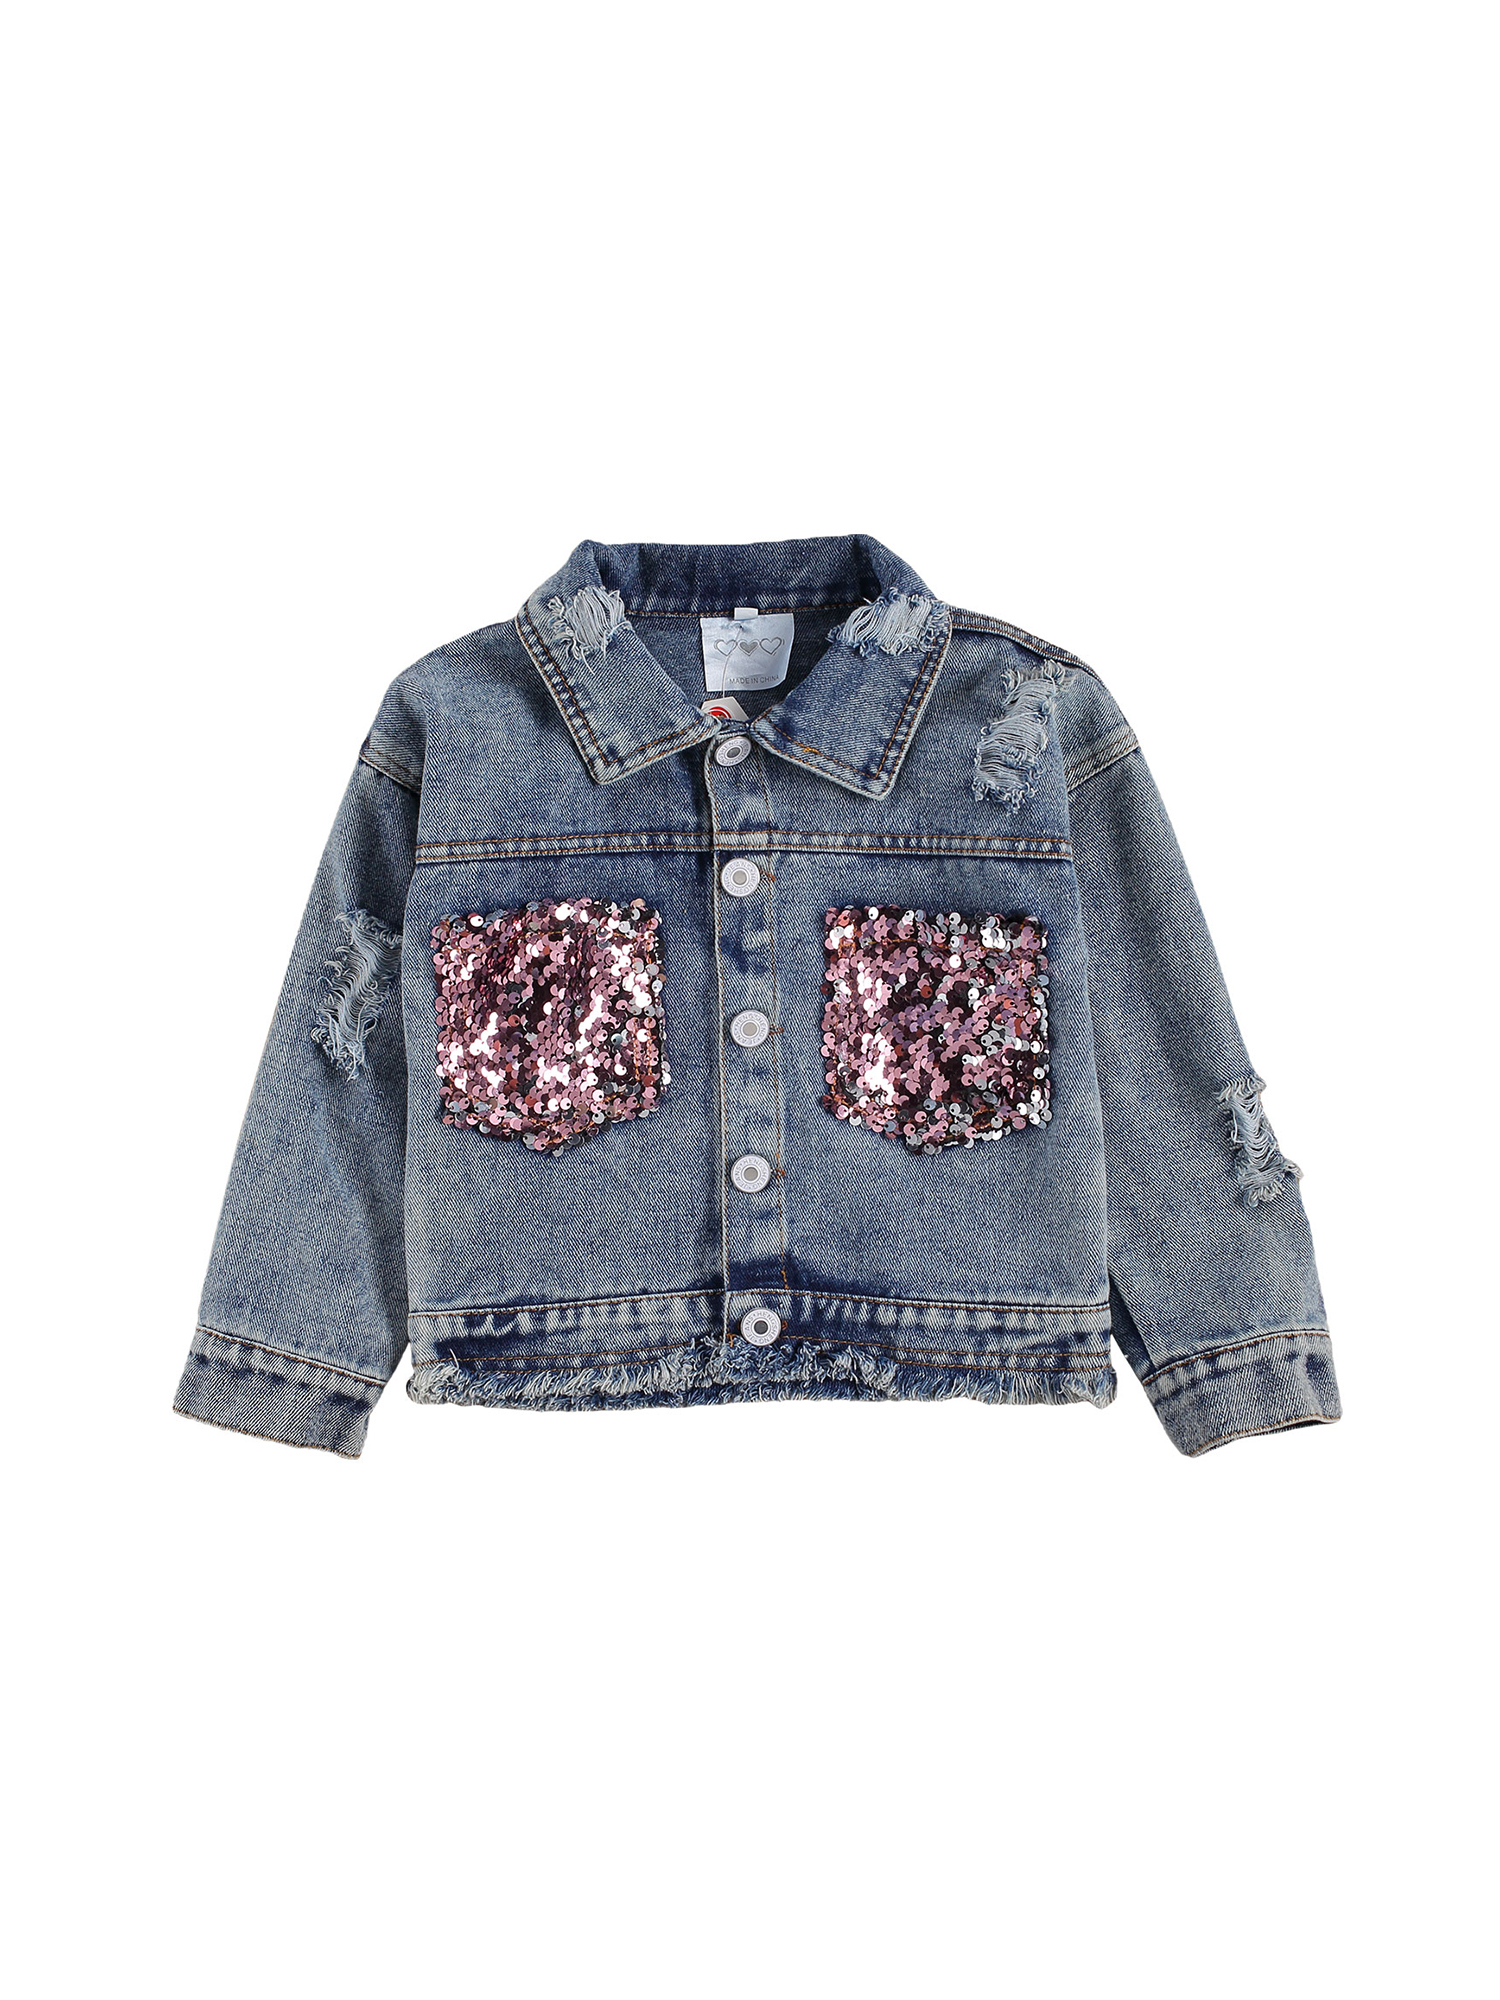 Toddler Baby Girl Coat Long Sleeve Denim Jacket Sequin Pockets Ripped Jean Jacket Outwear 1-6T - image 2 of 10